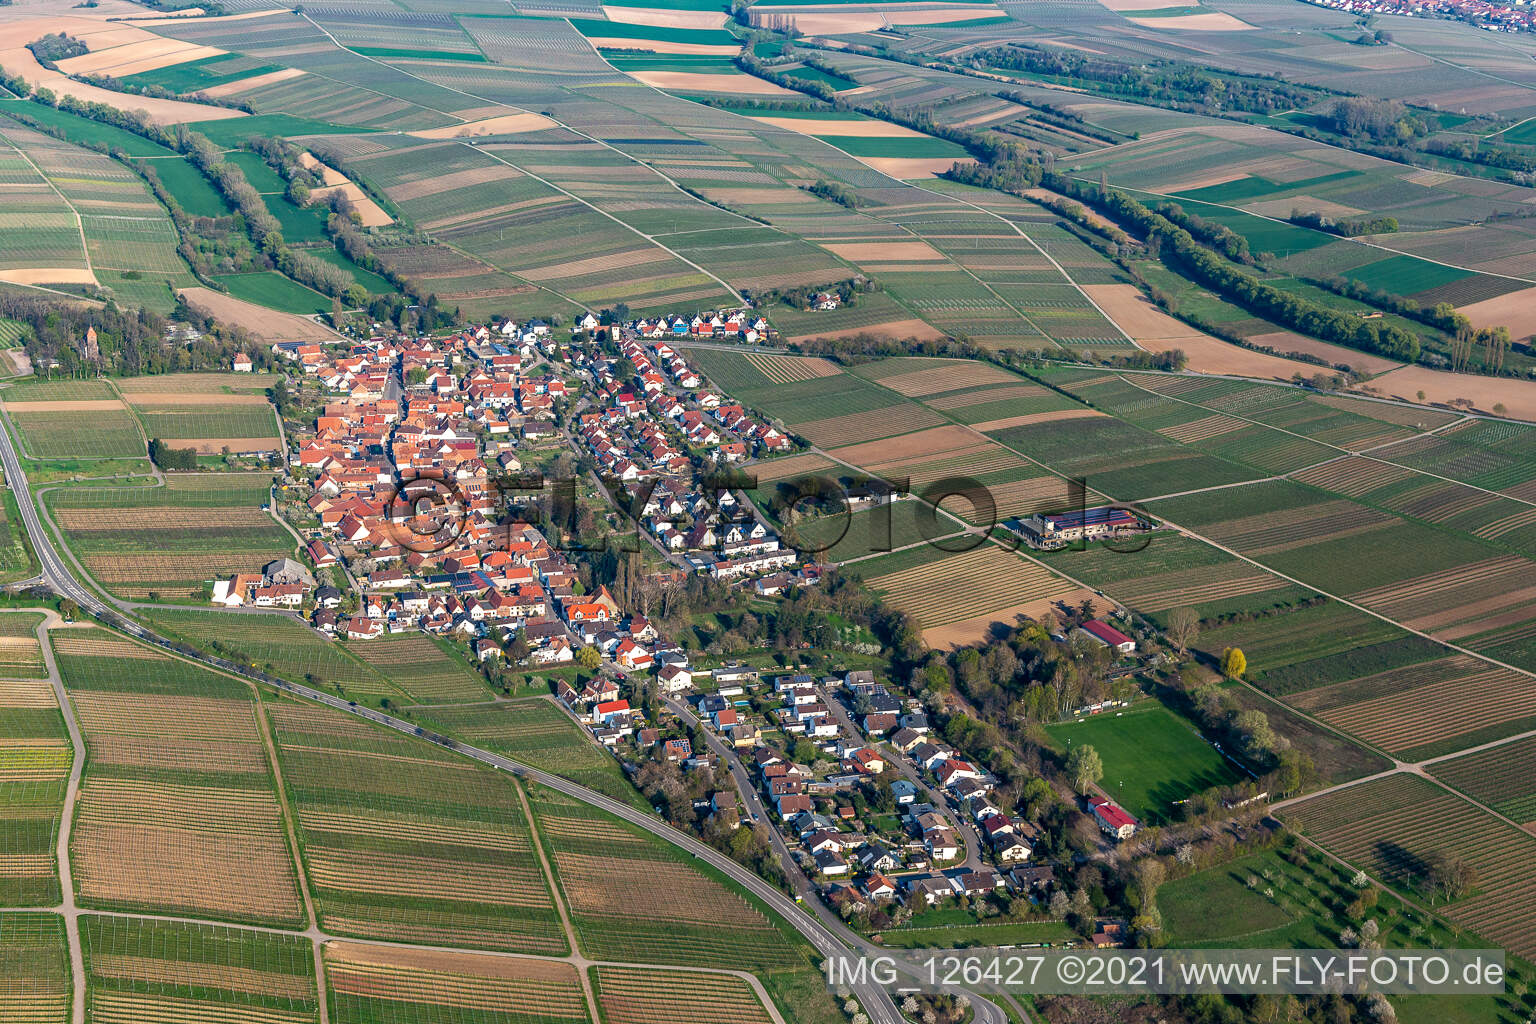 Agricultural land and field borders surround the settlement area of the village in Wollmesheim in the state Rhineland-Palatinate, Germany seen from a drone